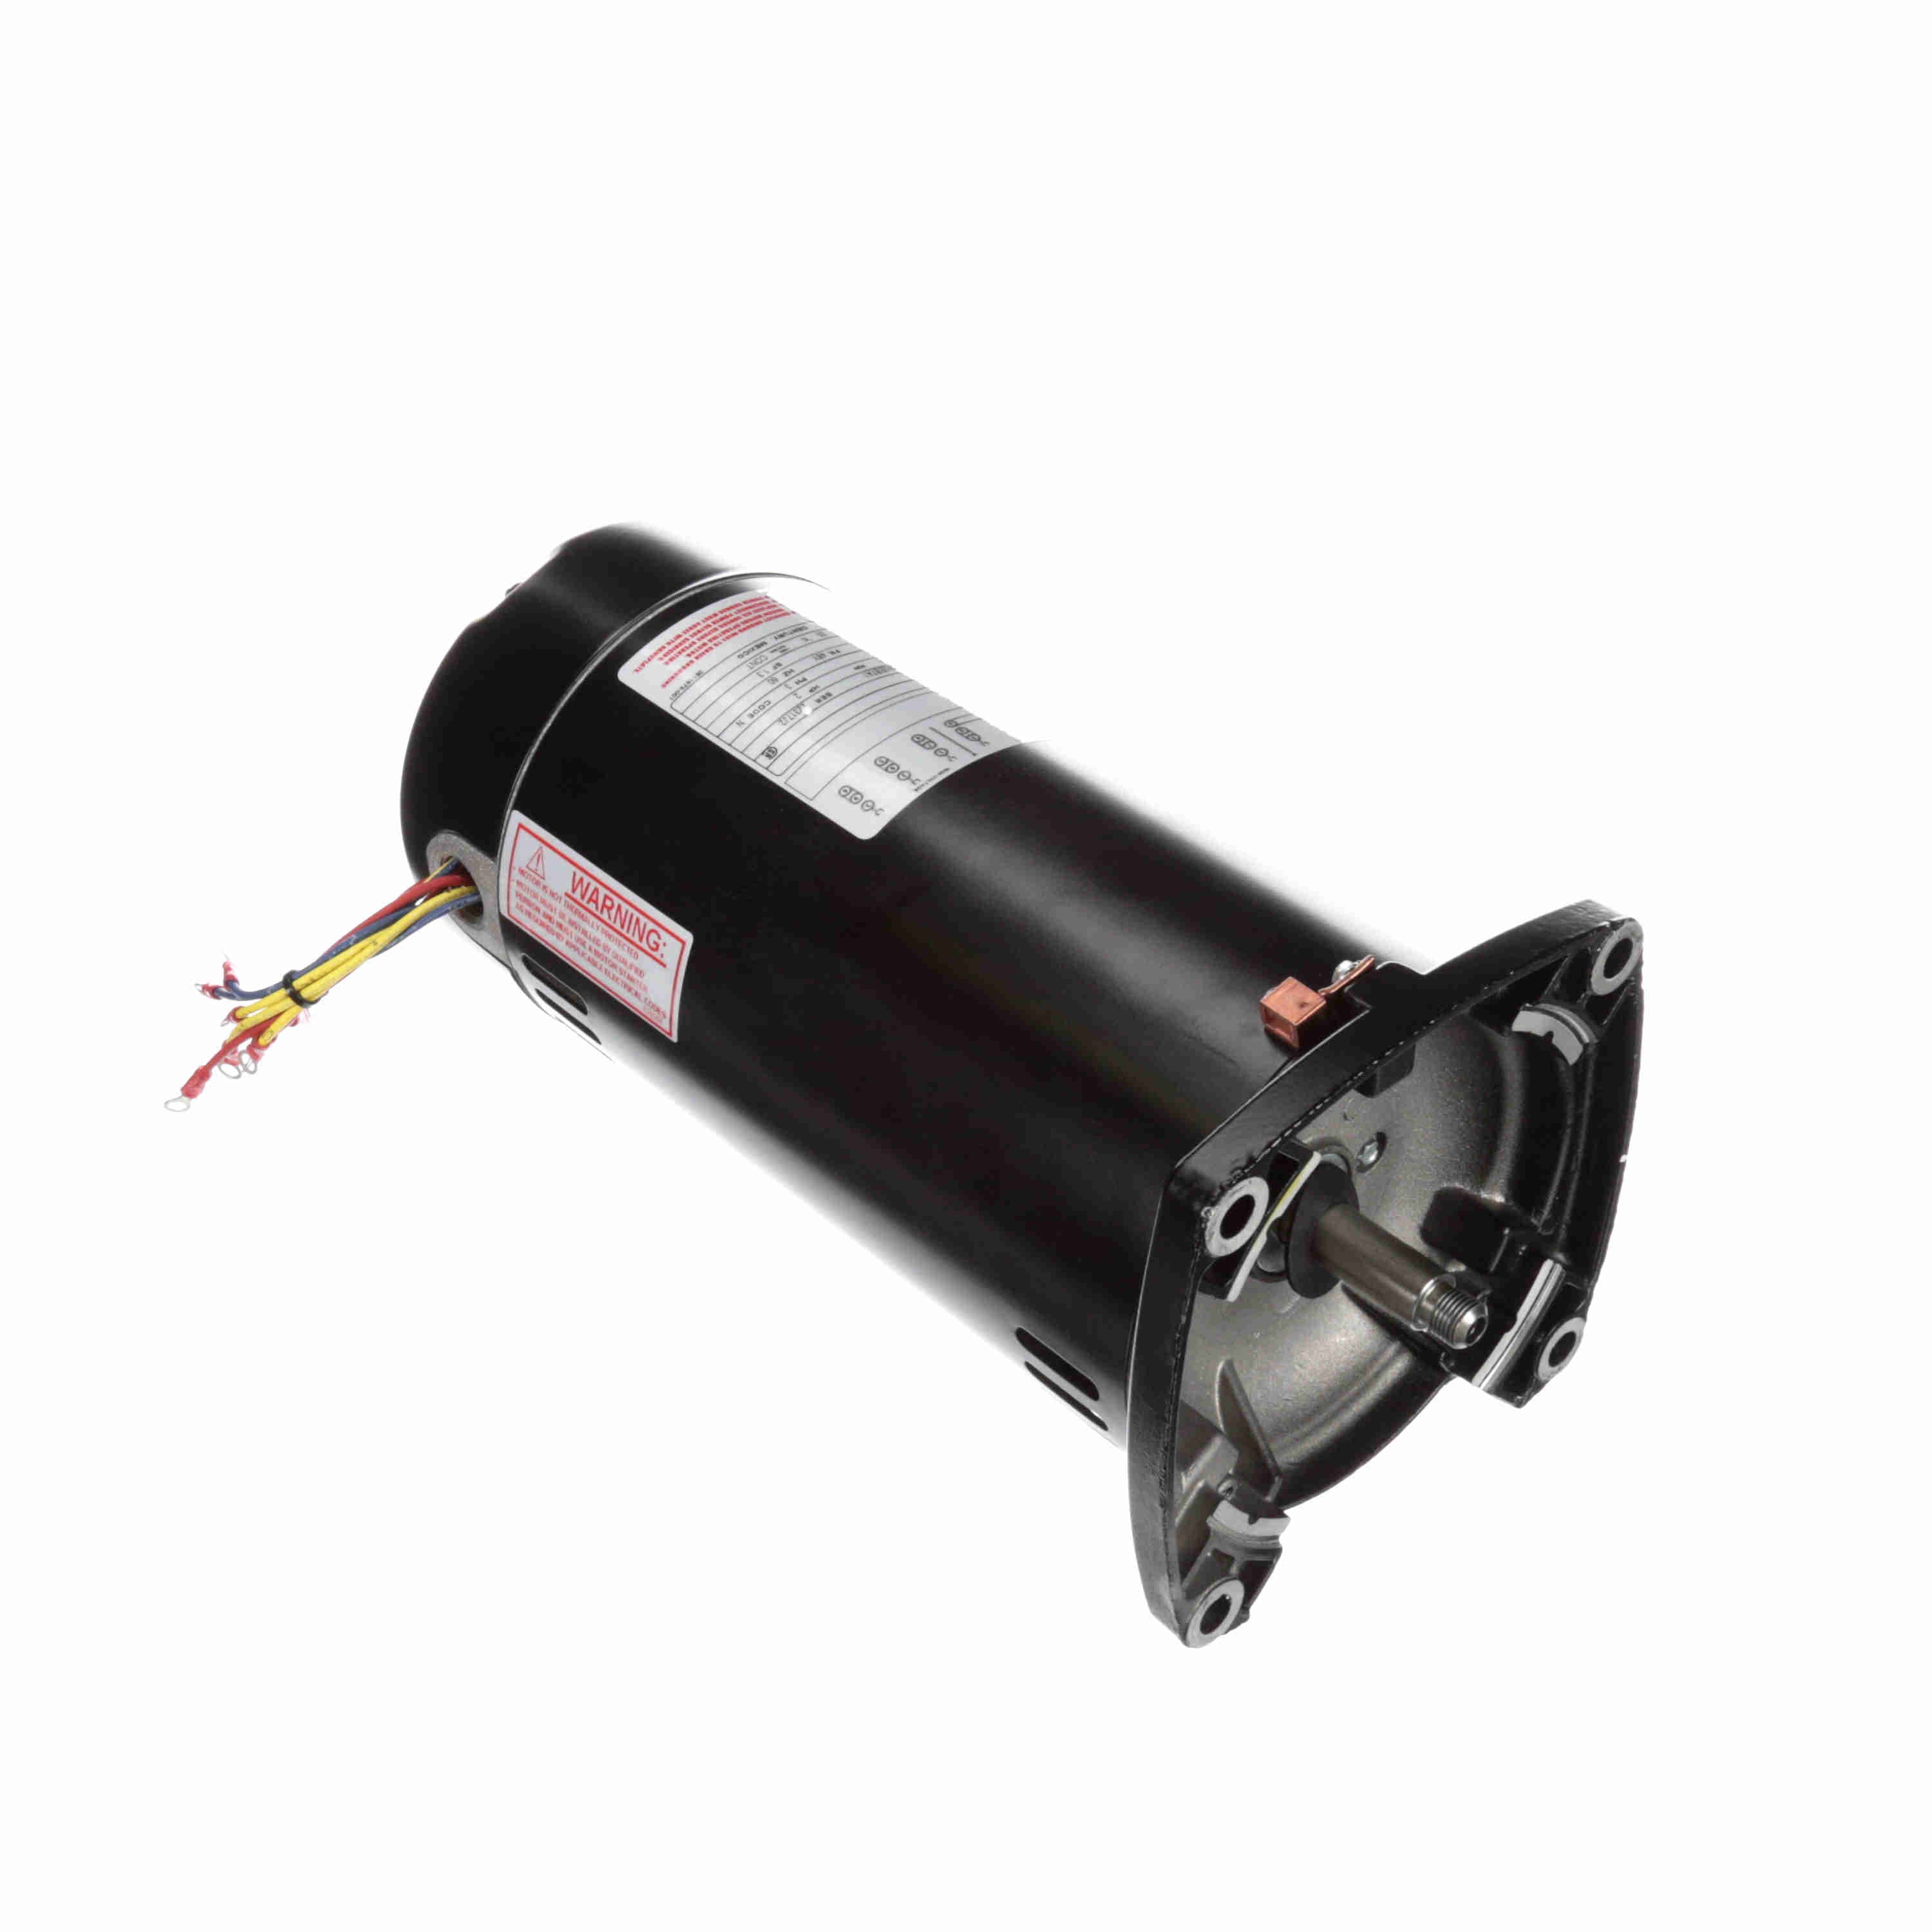 Century Square Flange 3-Phase Full-Rated Pool and Spa Pump Motor; 2 HP, 3450 RPM, 208-230/460 V, 48Y, Threaded Shaft - Q3202